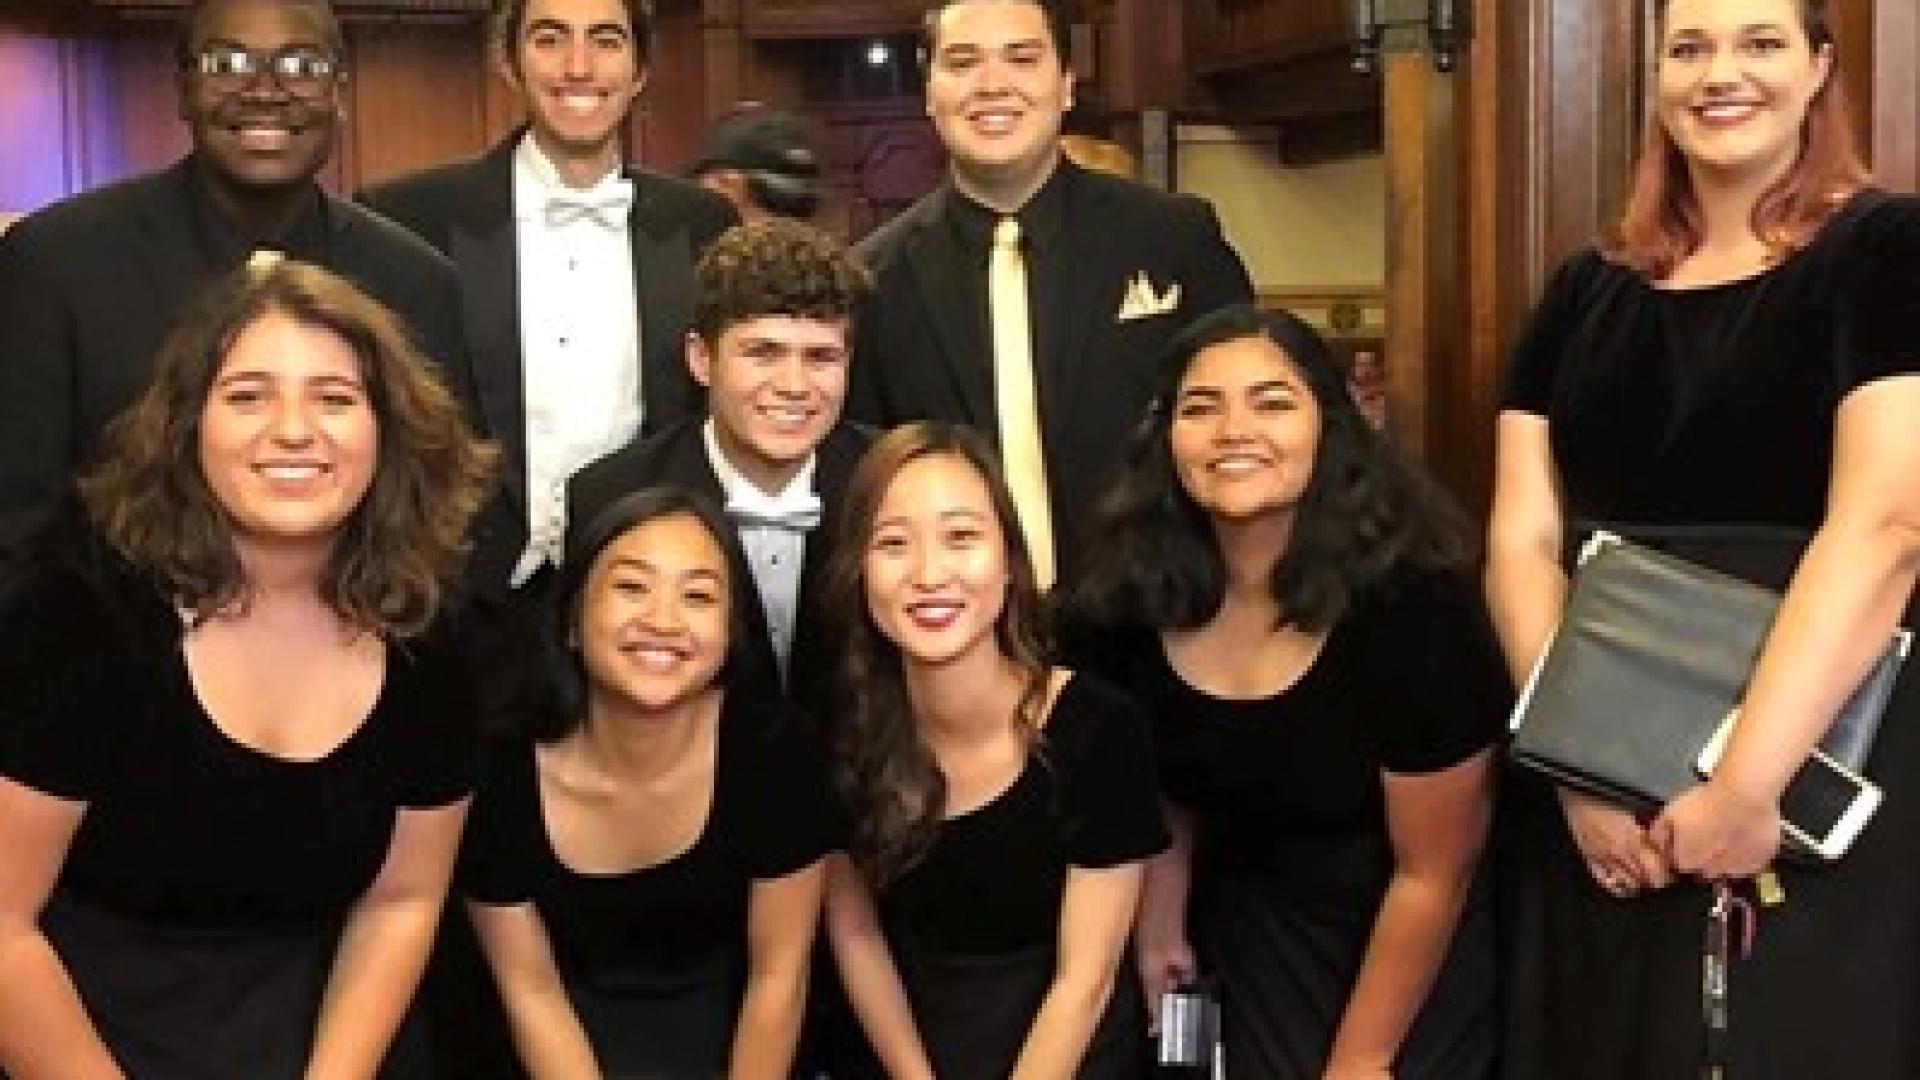 Bob Cole Conservatory’s annual Winterfest Concert in DTLB (2019)